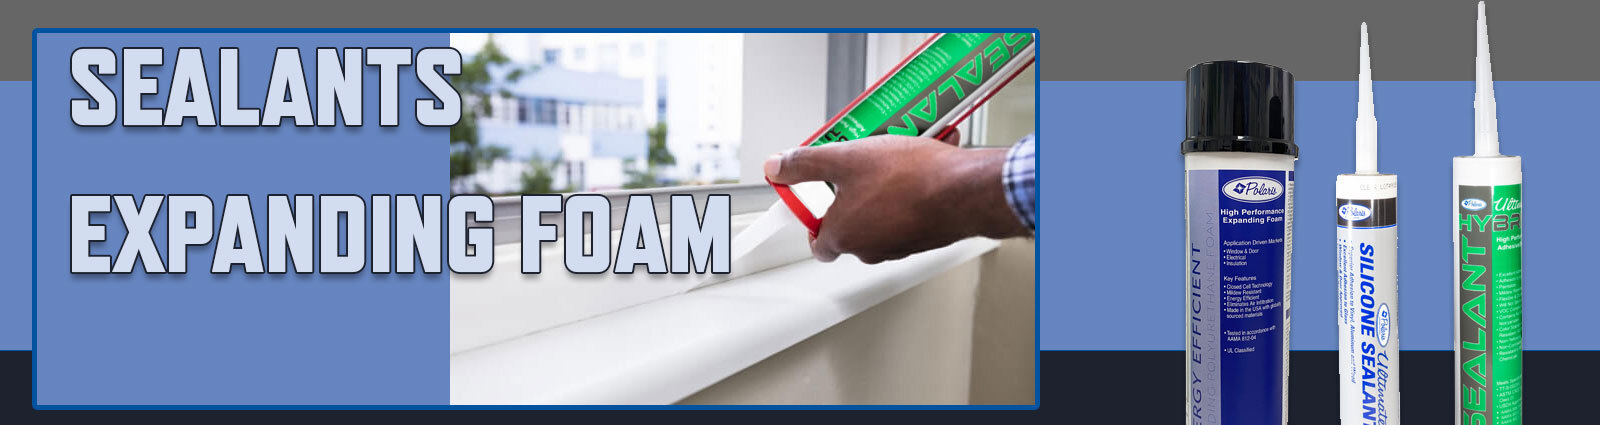 Sealants Home Page Banner